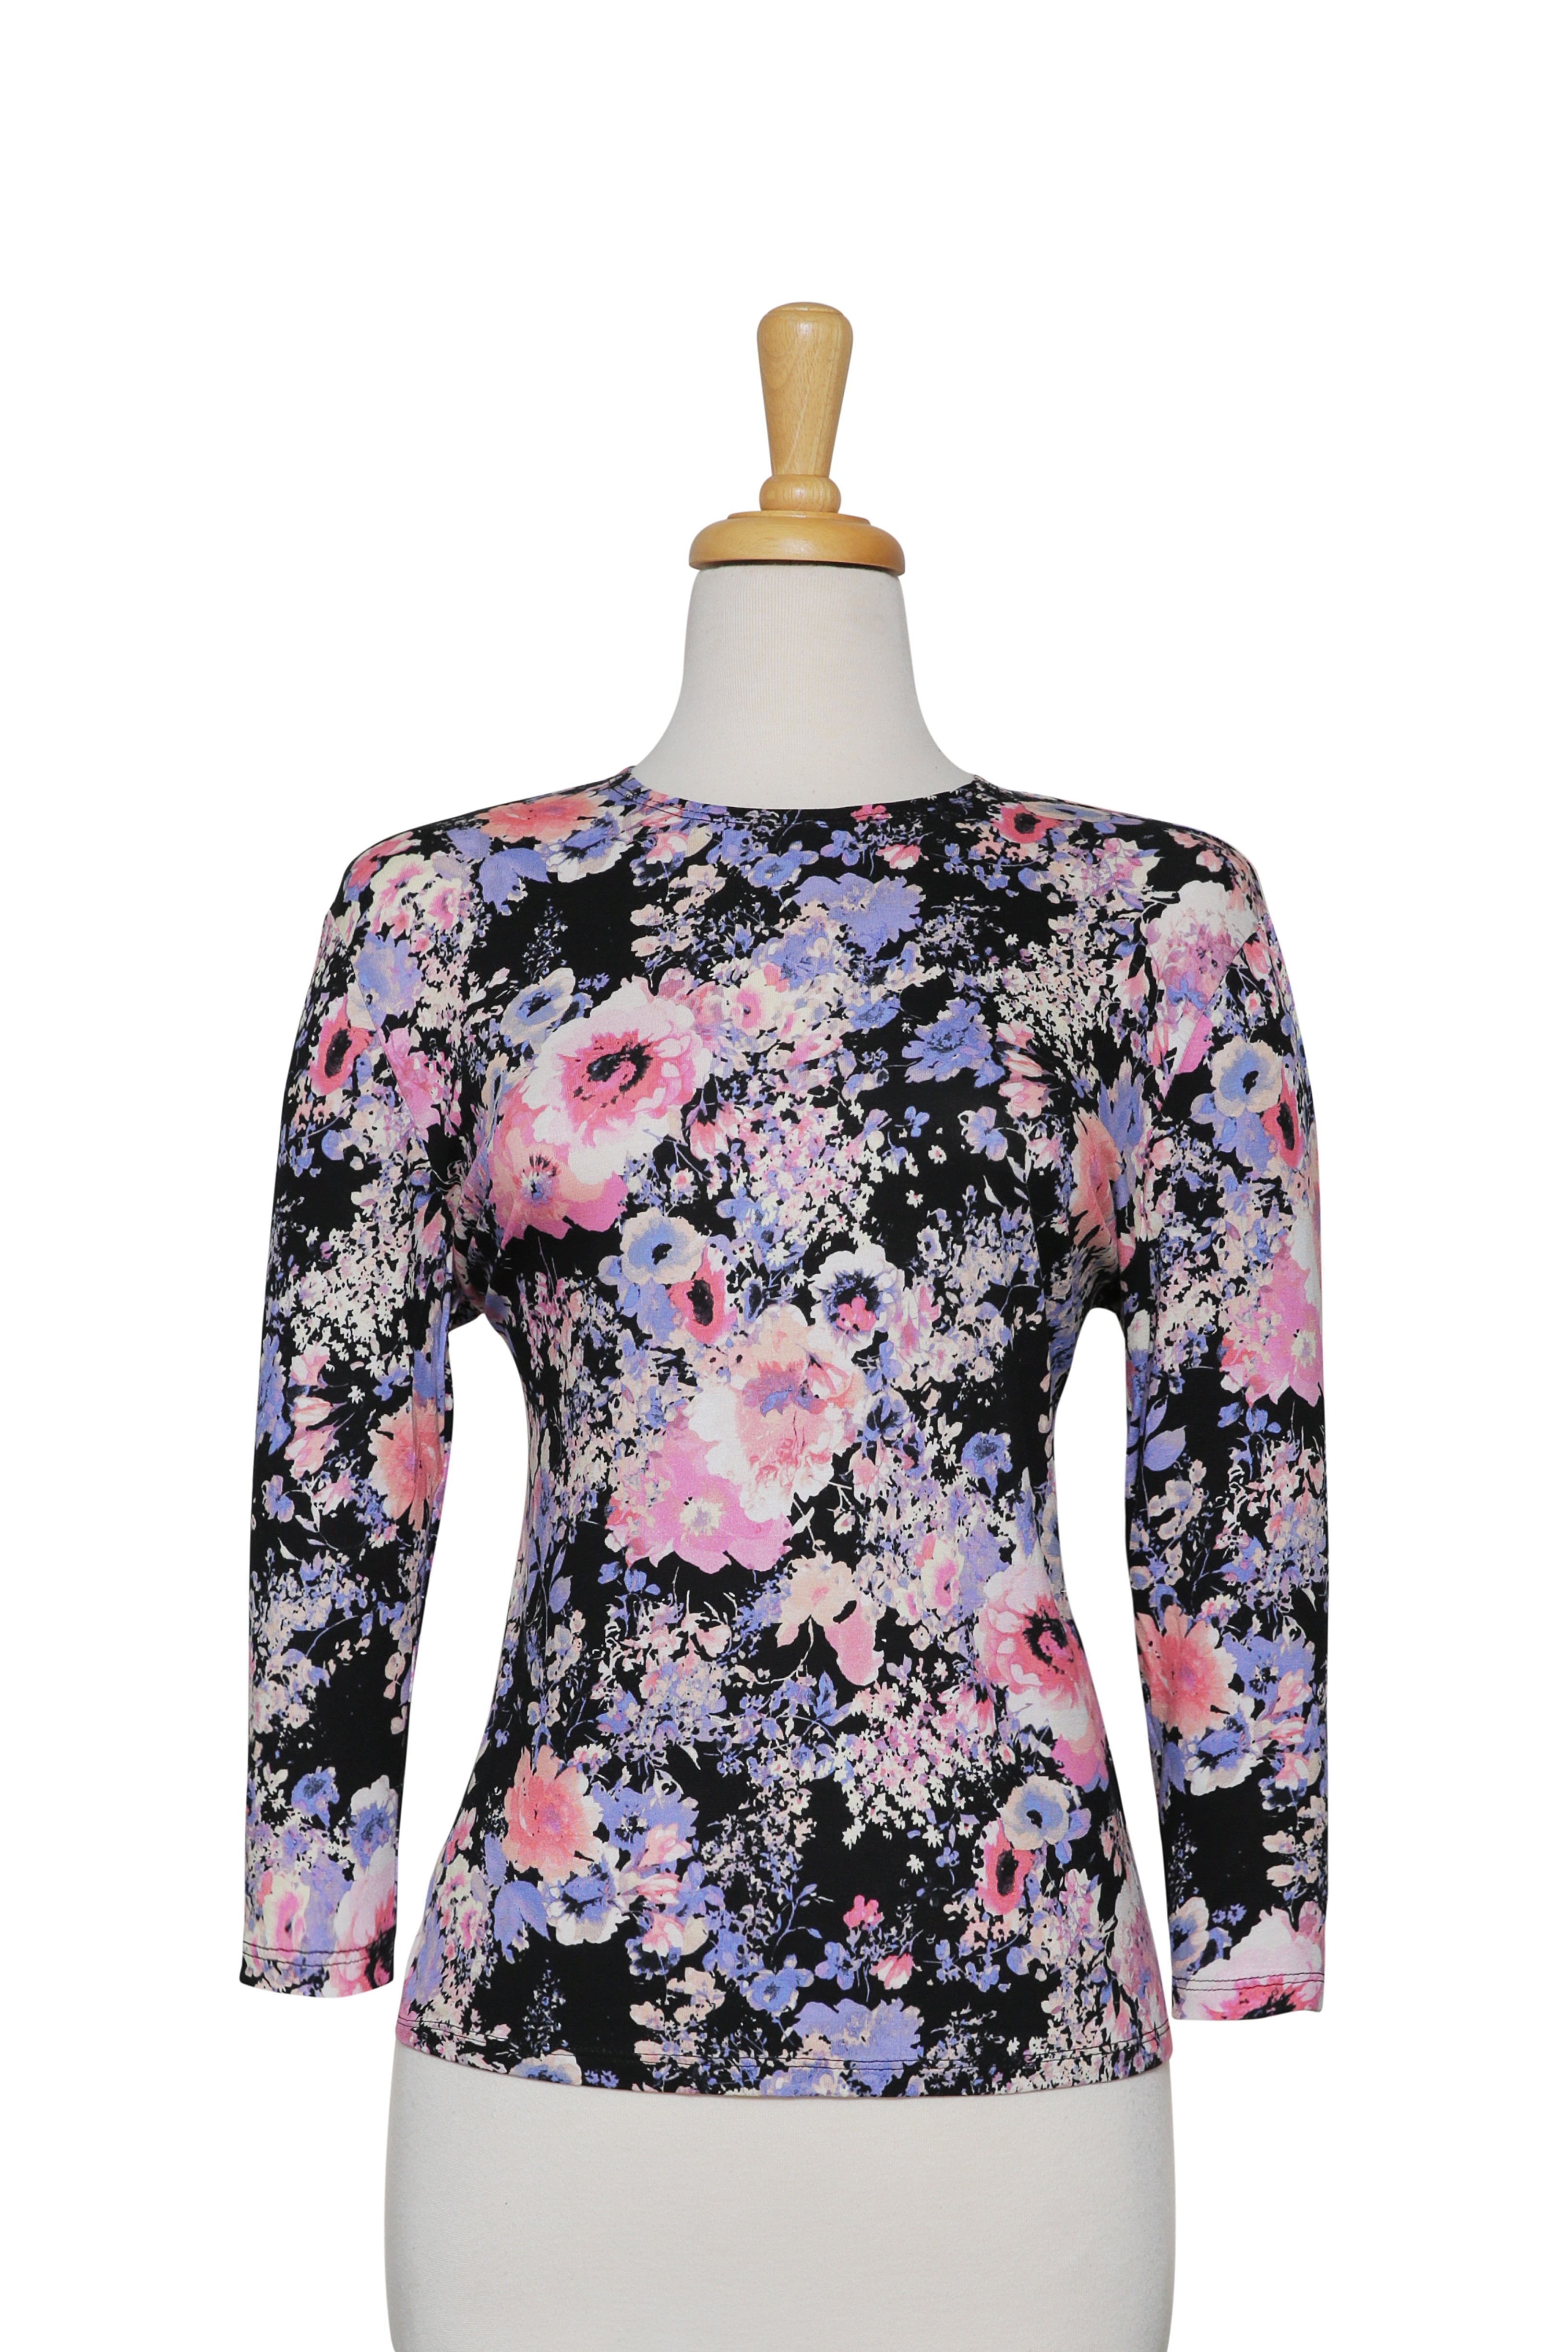 Plus Size Black, Pink and Blue Floral Display Cotton 3/4 Sleeve Top 